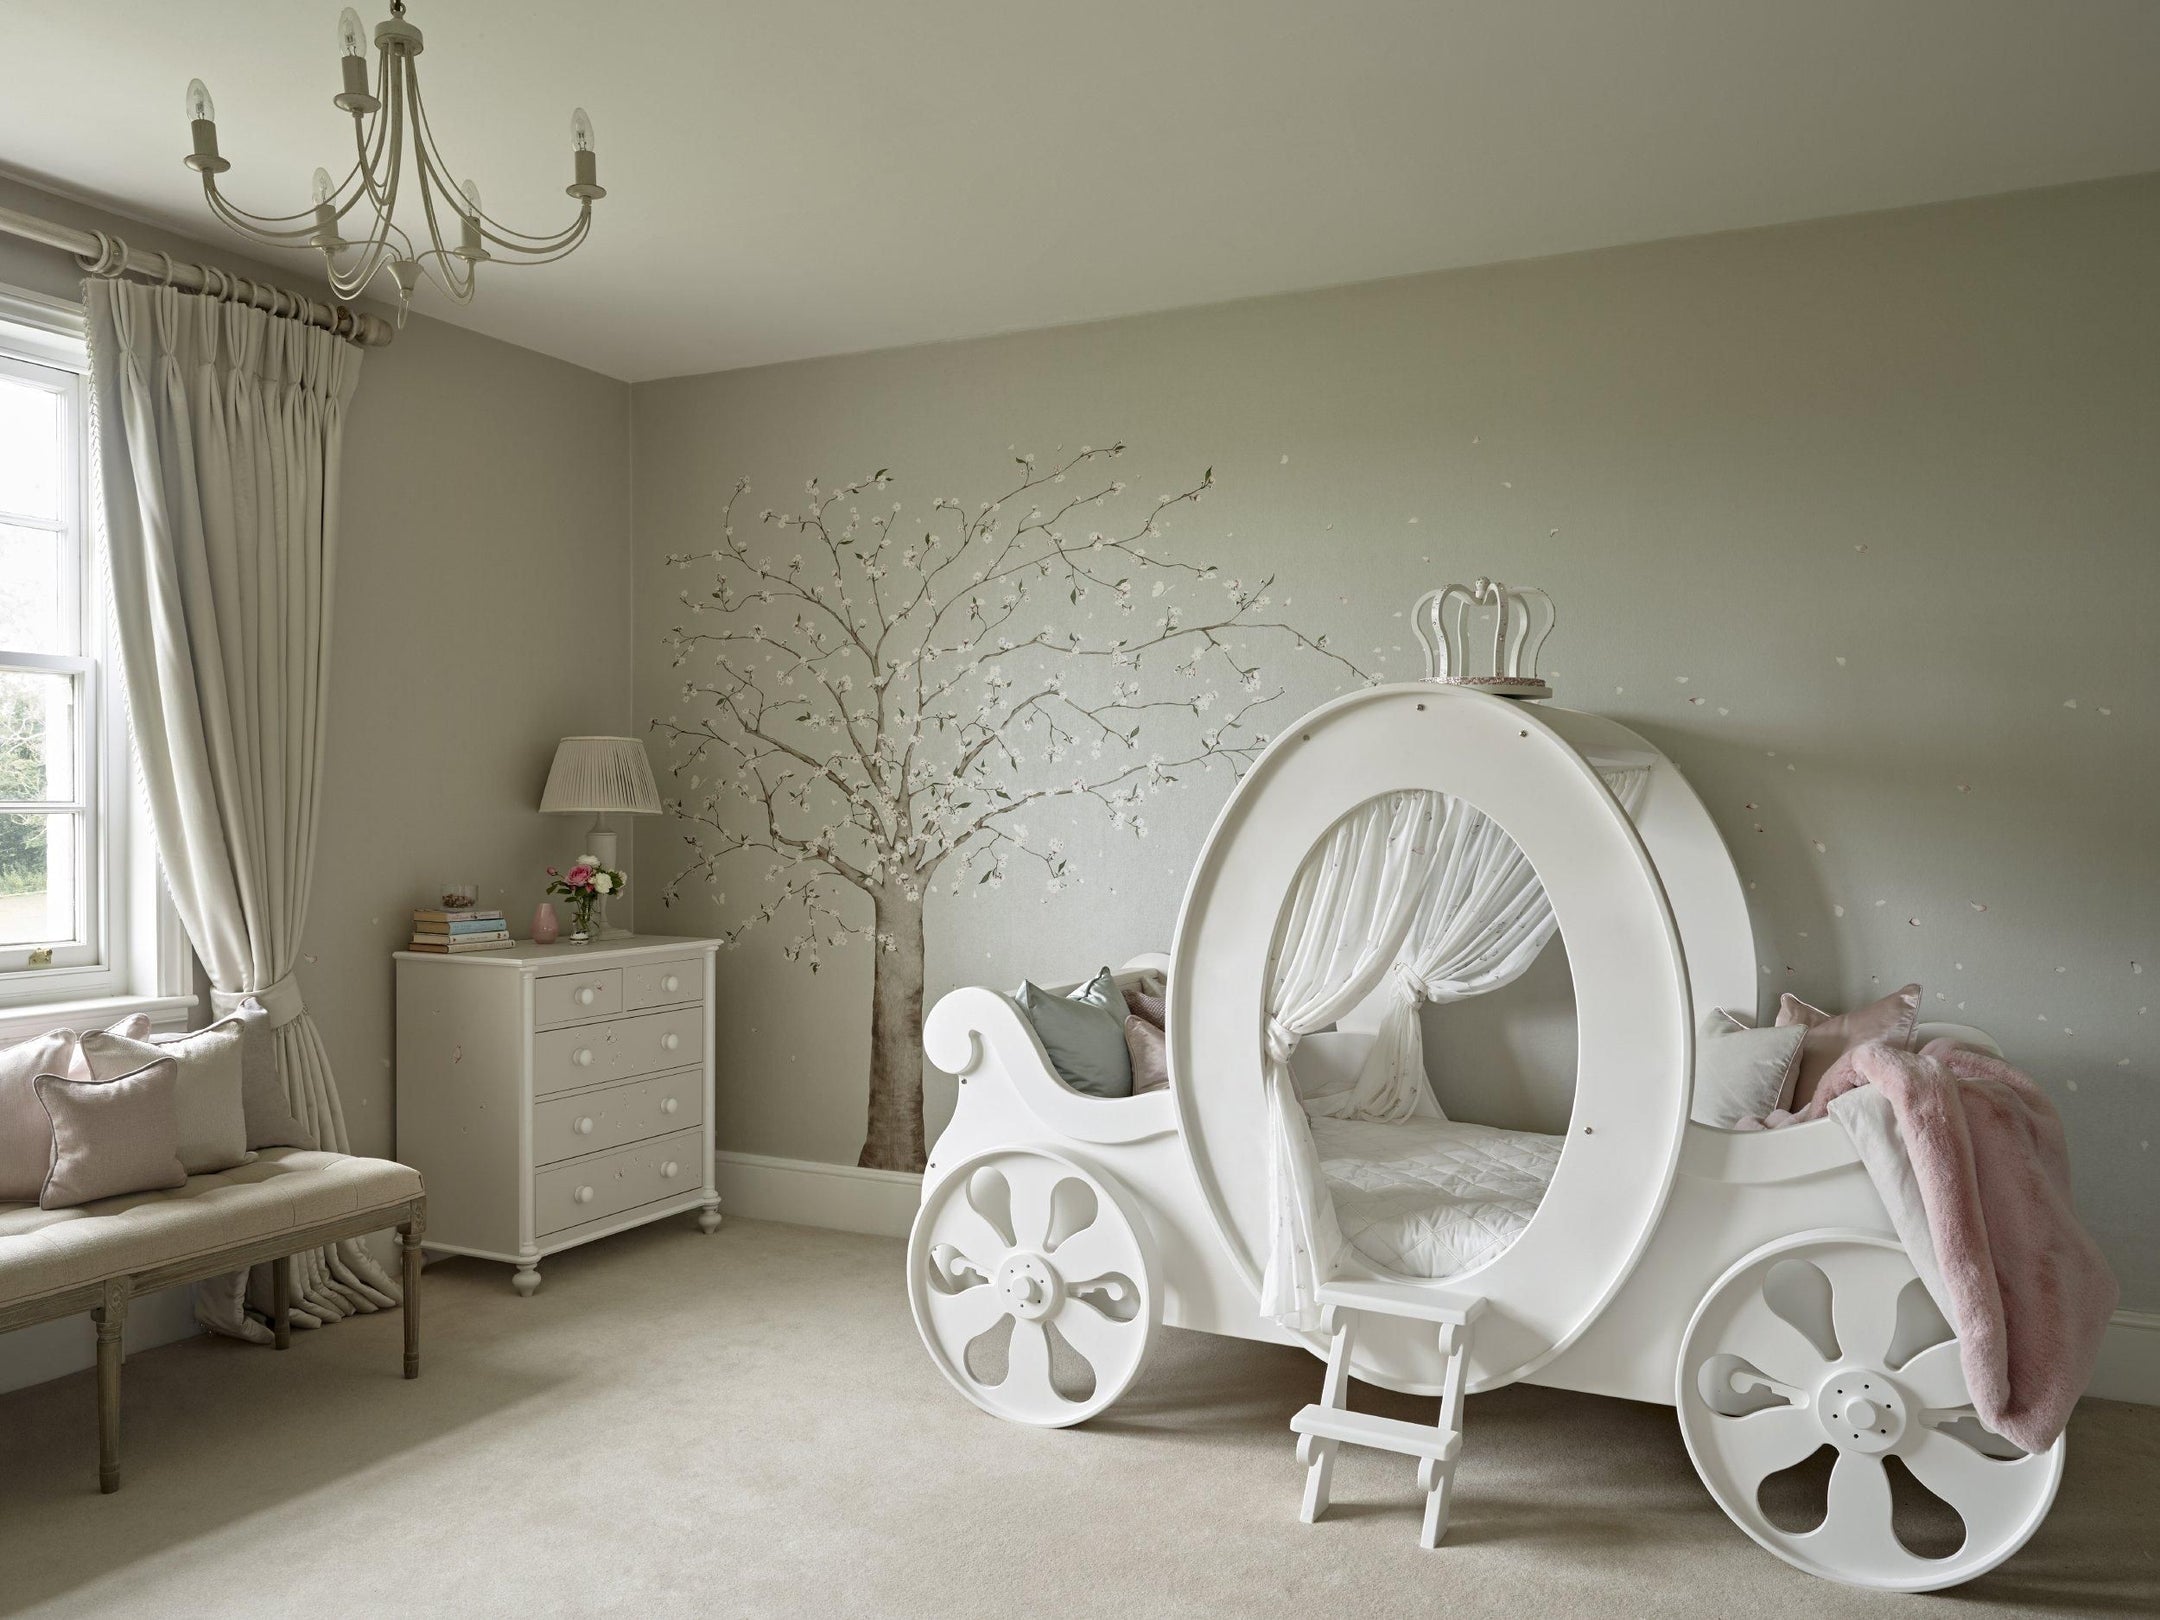 Princess Carriage Bed